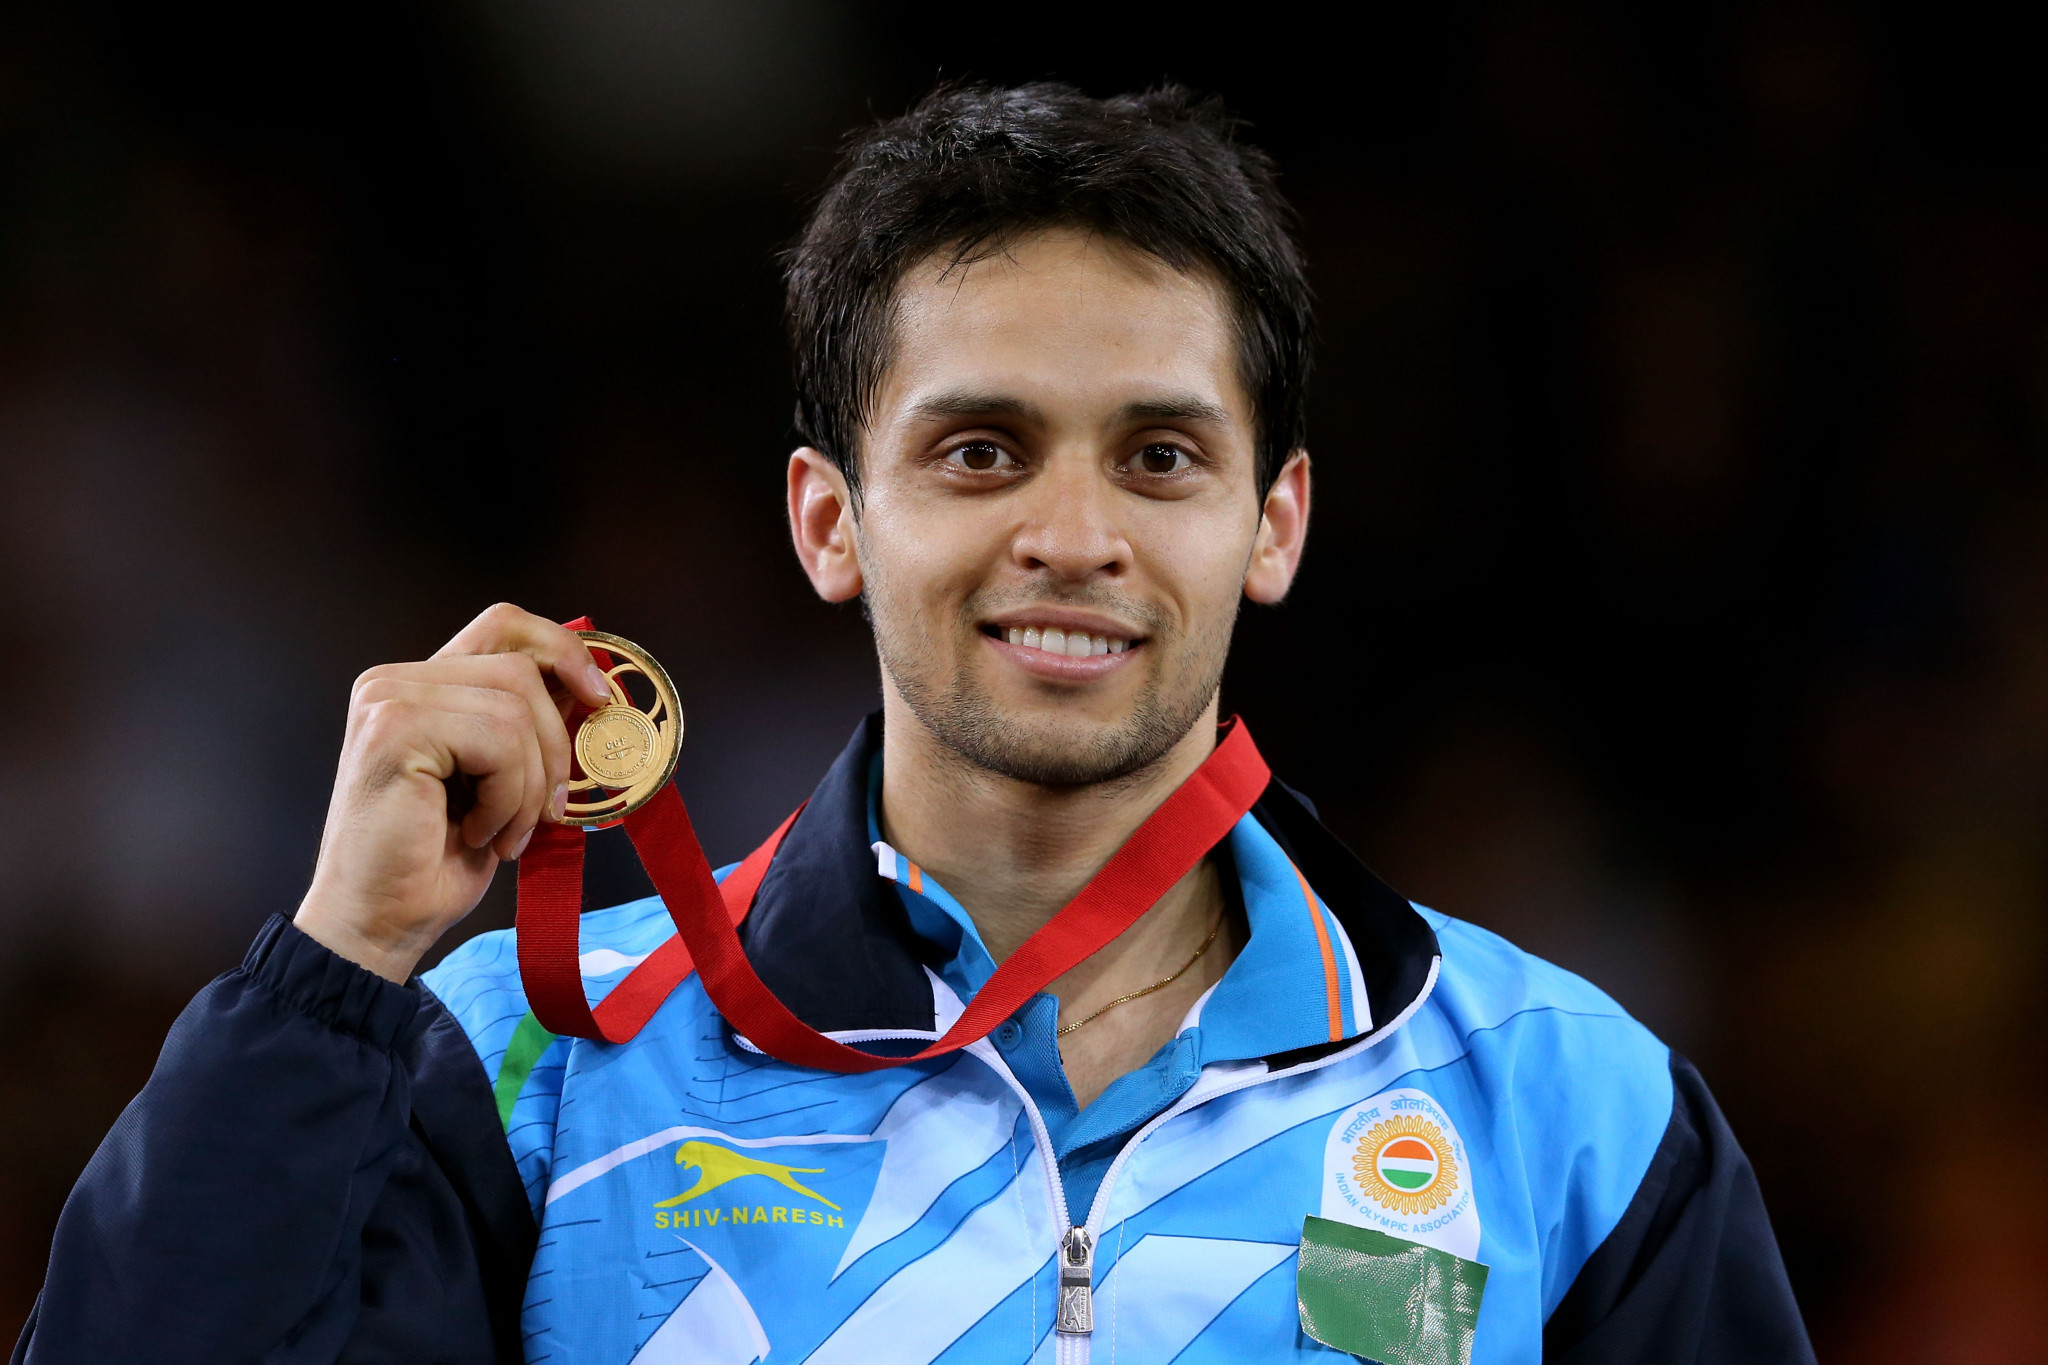 Badminton player Kashyap Parupalli was one of 215 athletes at the last Commonwealth Games in Glasgow ©Getty Images